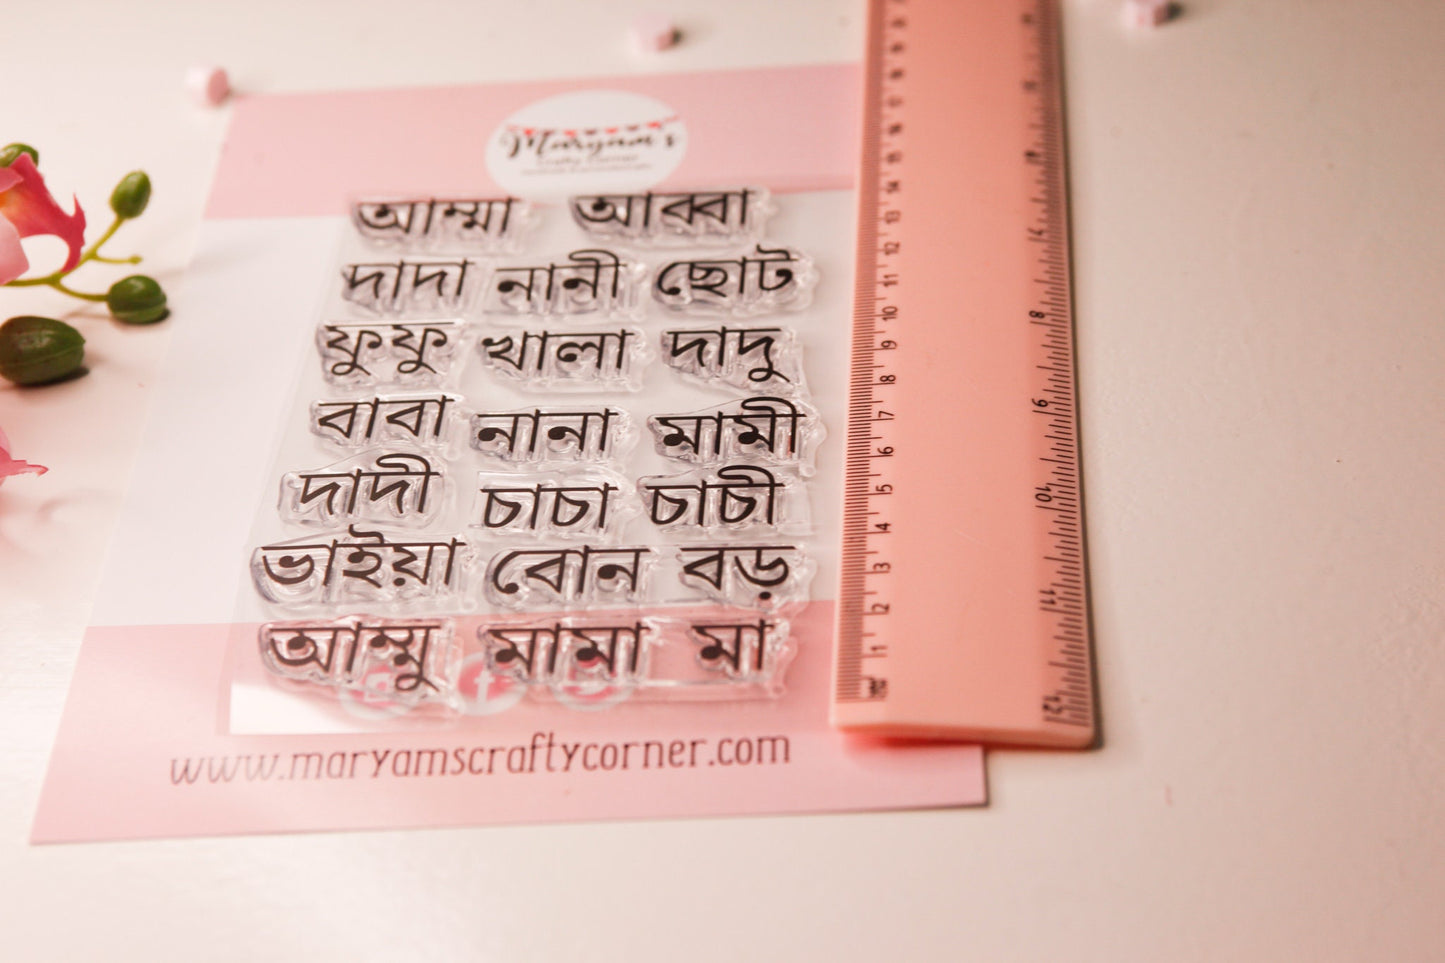 A set of unmounted Bangla Stamps, Ideal Bangla stamps for greeting cards and making Bengali Cards